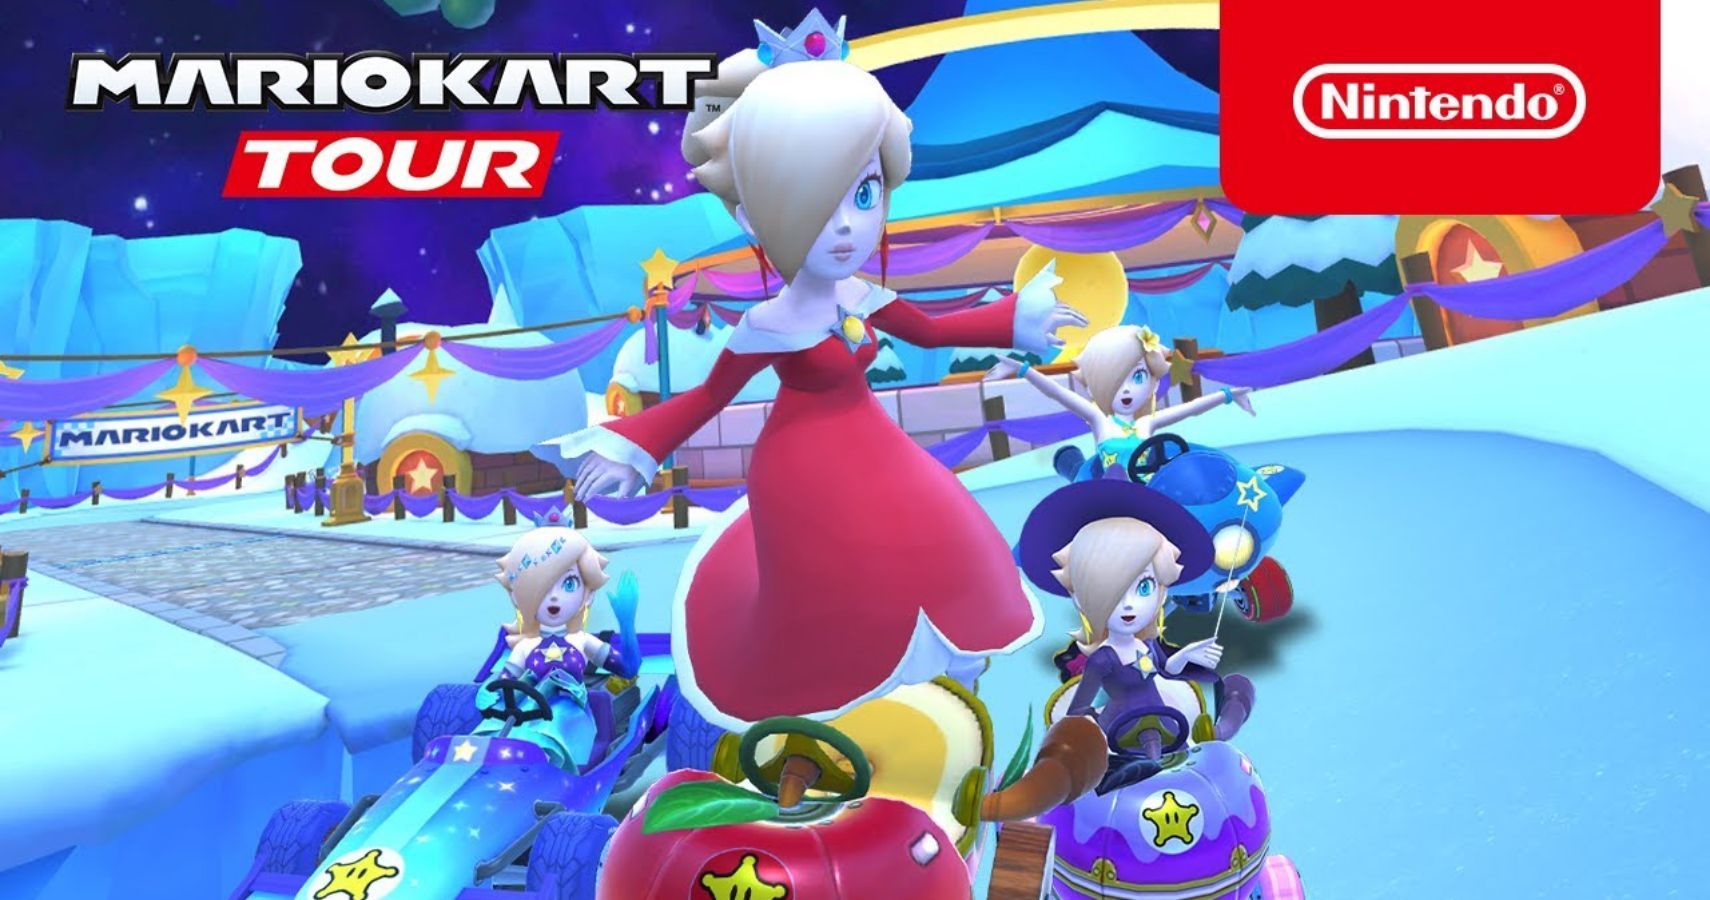 Mario Kart Tour The Festive Rosalina Tour Brings "Starry Skies And Icy